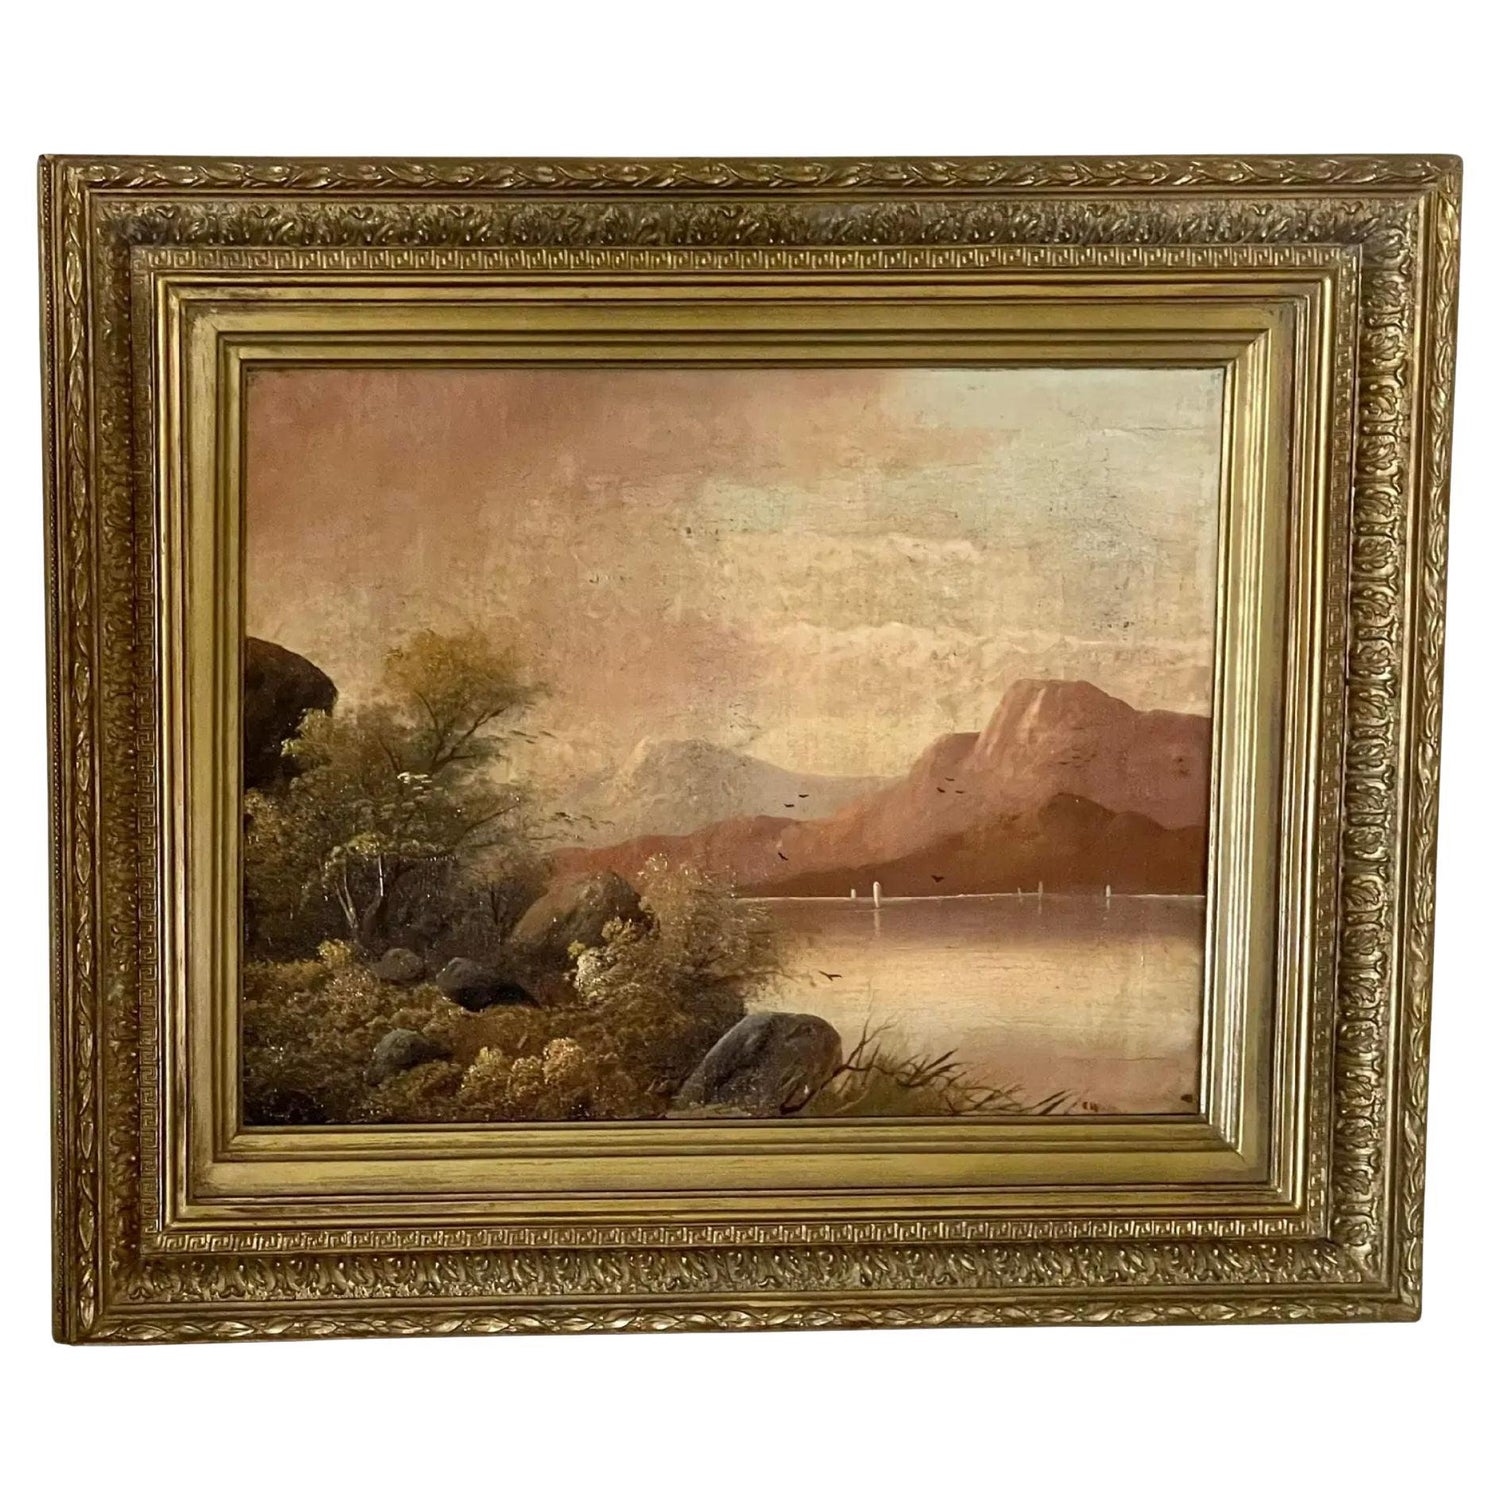 https://a.1stdibscdn.com/antique-british-landscape-oil-painting-in-giltwood-frame-19th-century-for-sale/22569652/f_327378921676268153840/f_32737892_1676268154575_bg_processed.jpg?width=1500